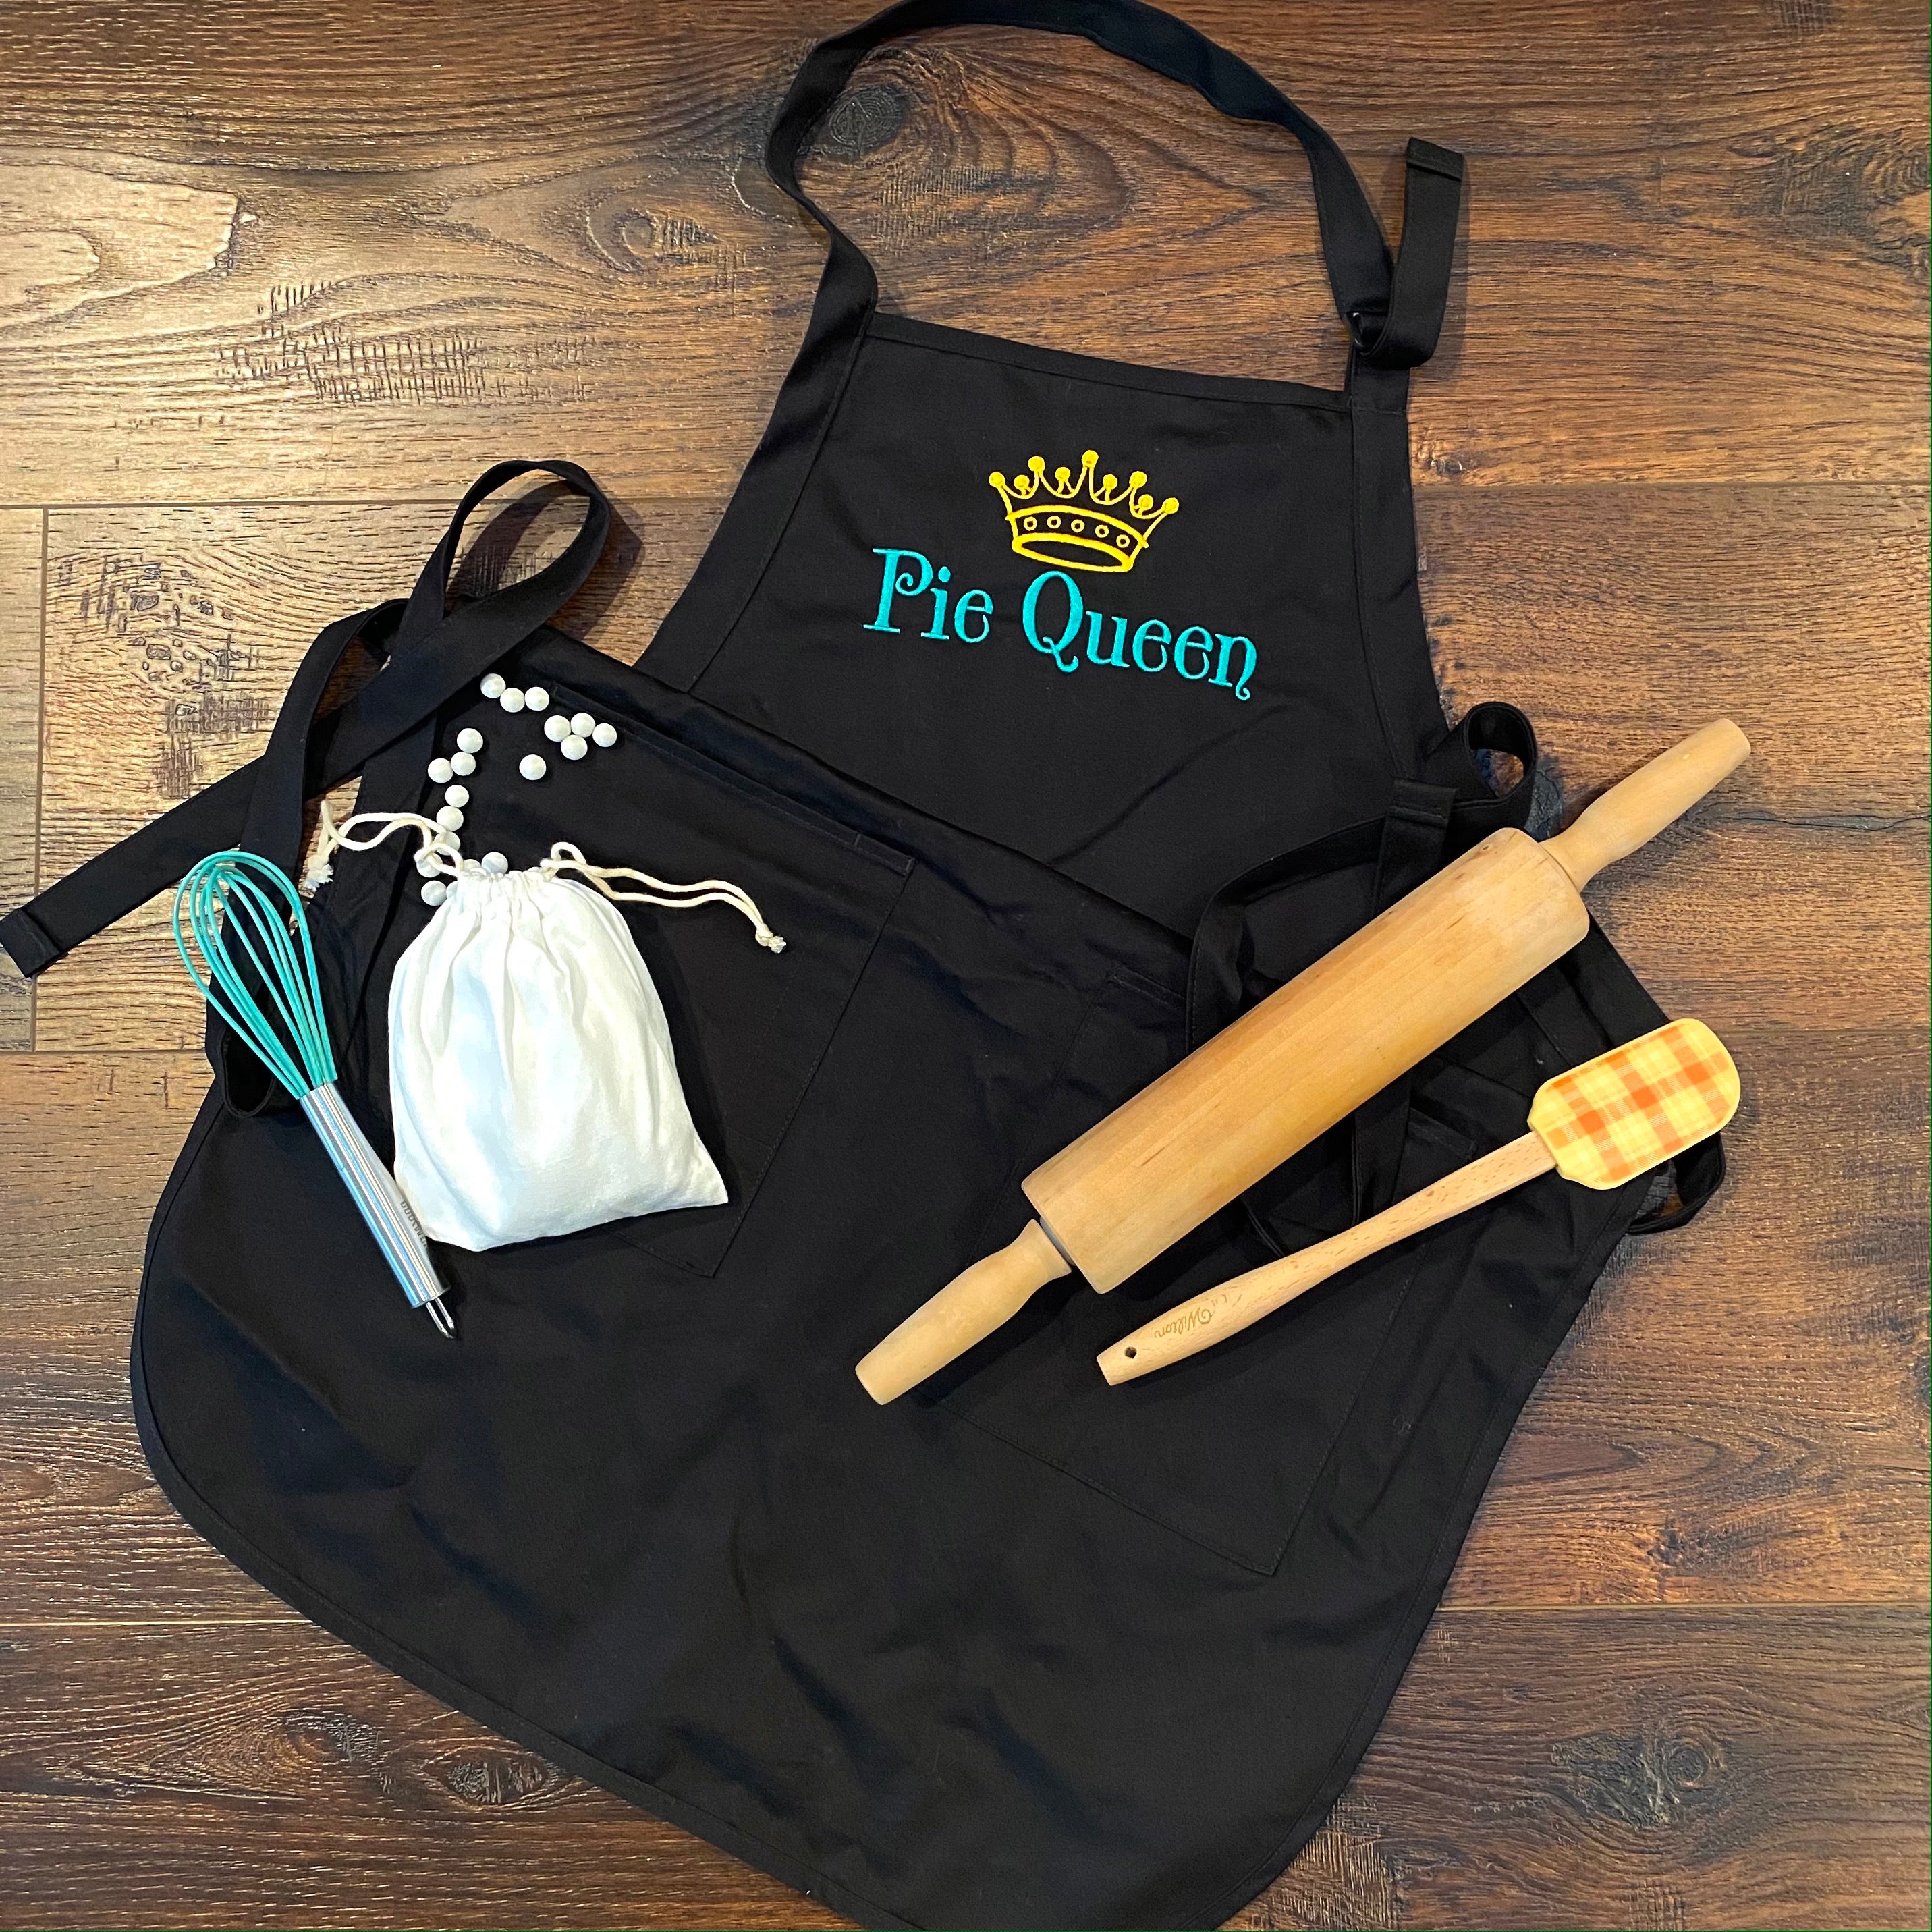 Pie Queen Embroidered Outlander Inspired Apron - Multiple Apron Color/Style Options